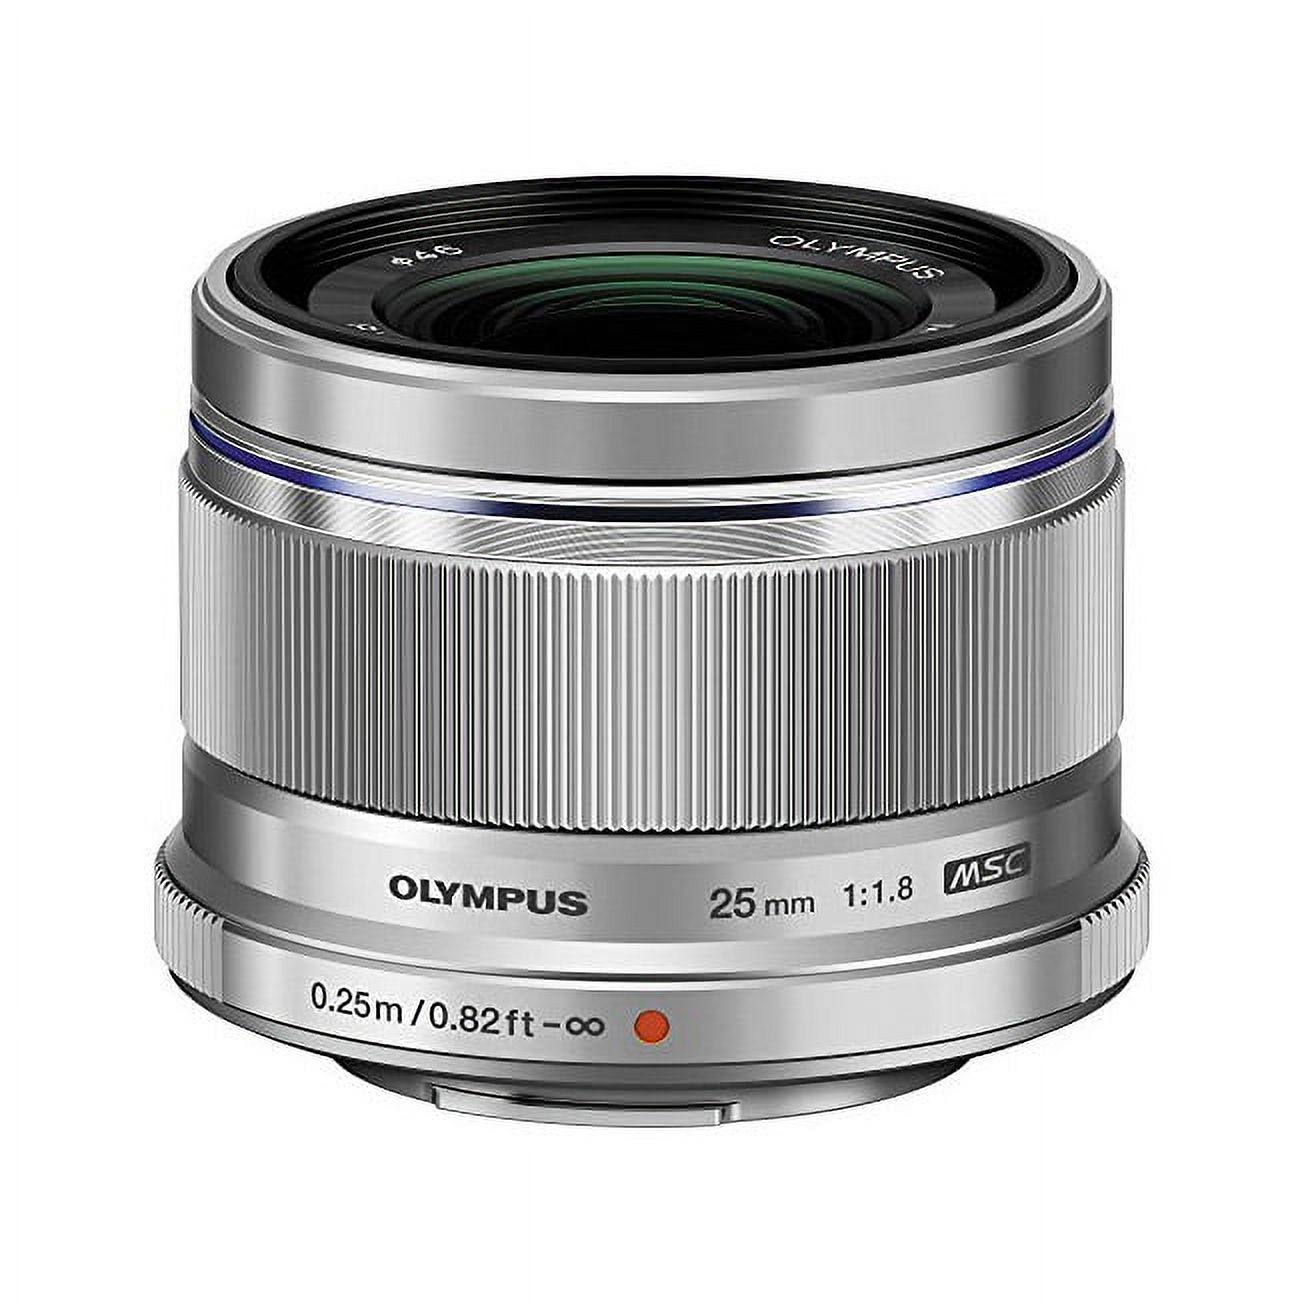 Olympus M.Zuiko Digital 25mm F1.8 Lens, for Micro Four Thirds Cameras (Silver) - image 1 of 2